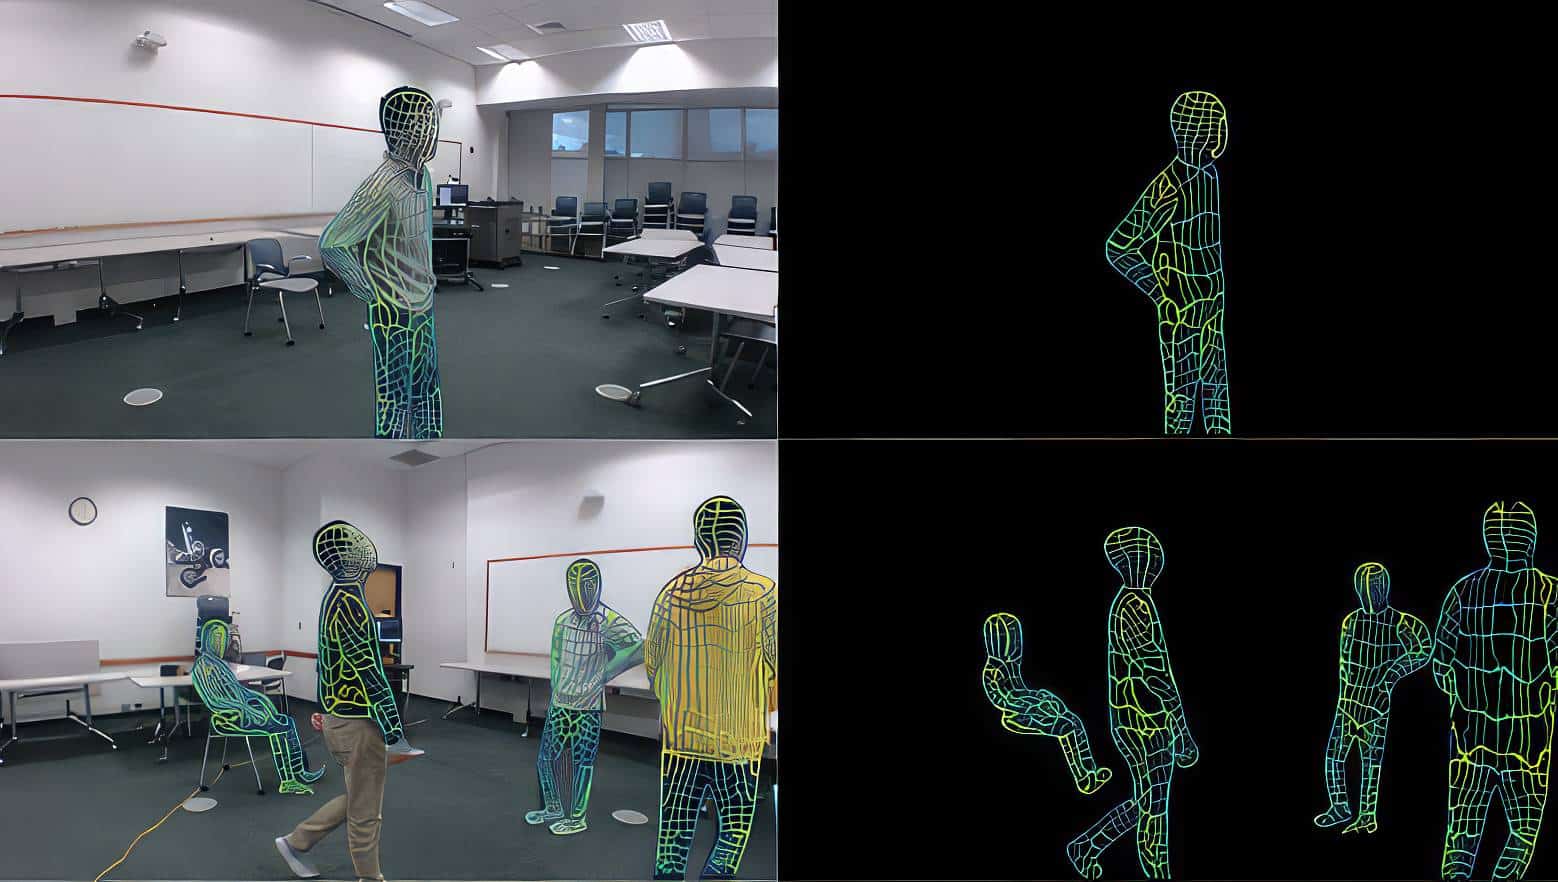 Carnegie Mellon study introduces WiFi-based human pose estimation as an alternative to camera and radar systems. The innovation offers hurdle-free detection, preserving privacy.